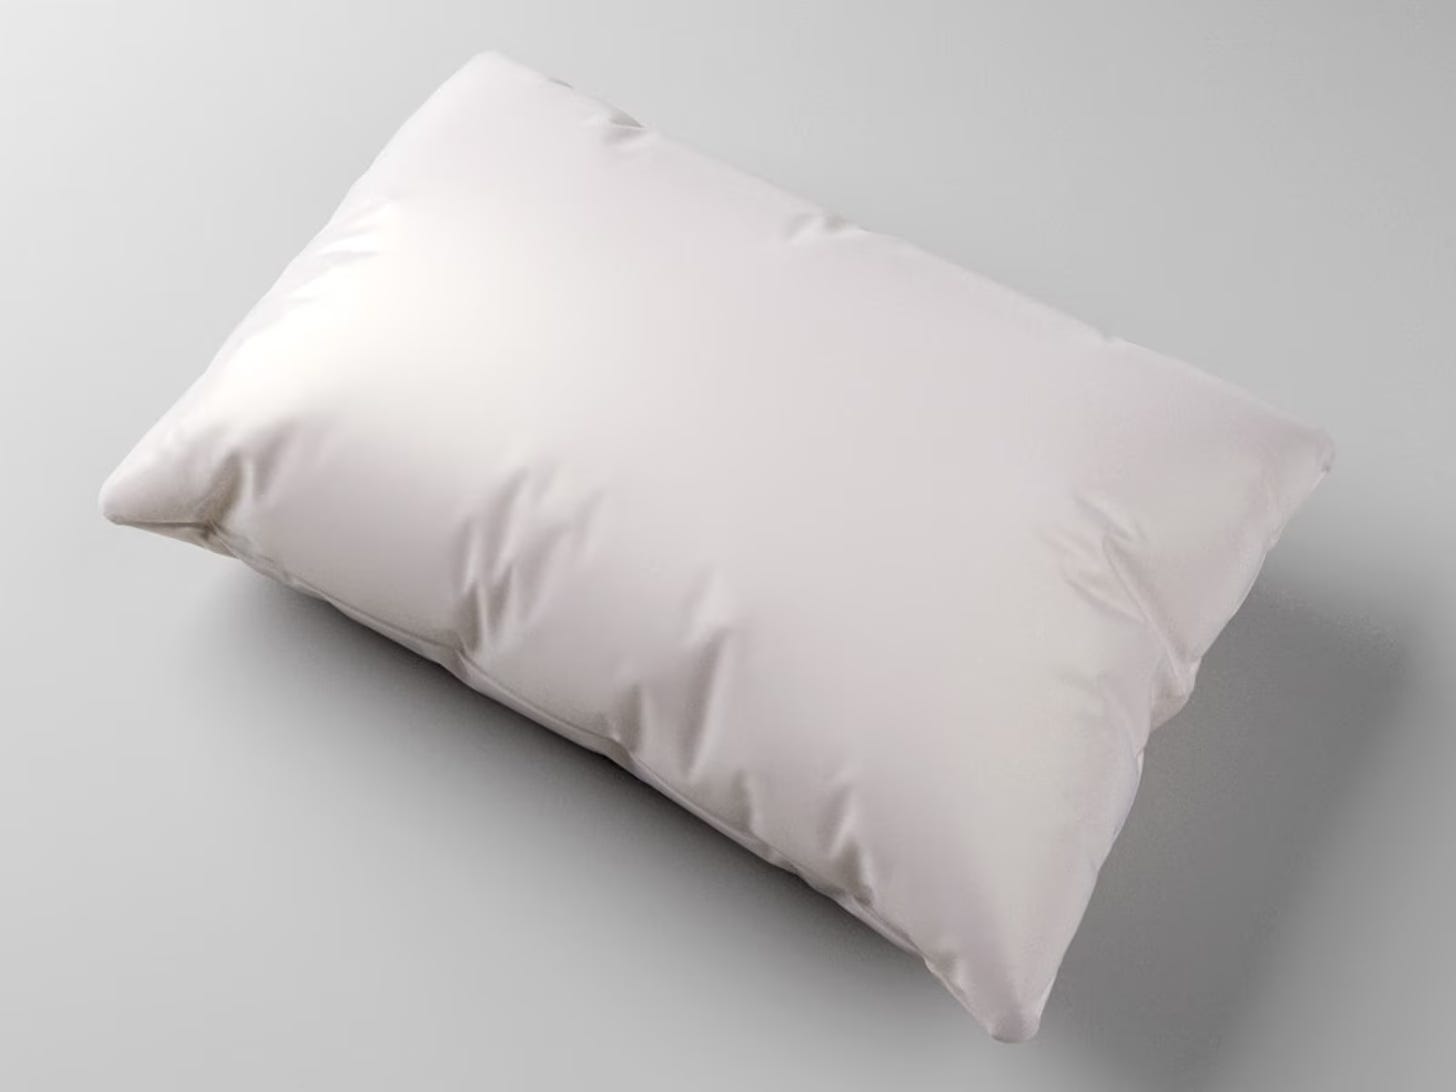 Literally the plainest looking pillow imaginable.